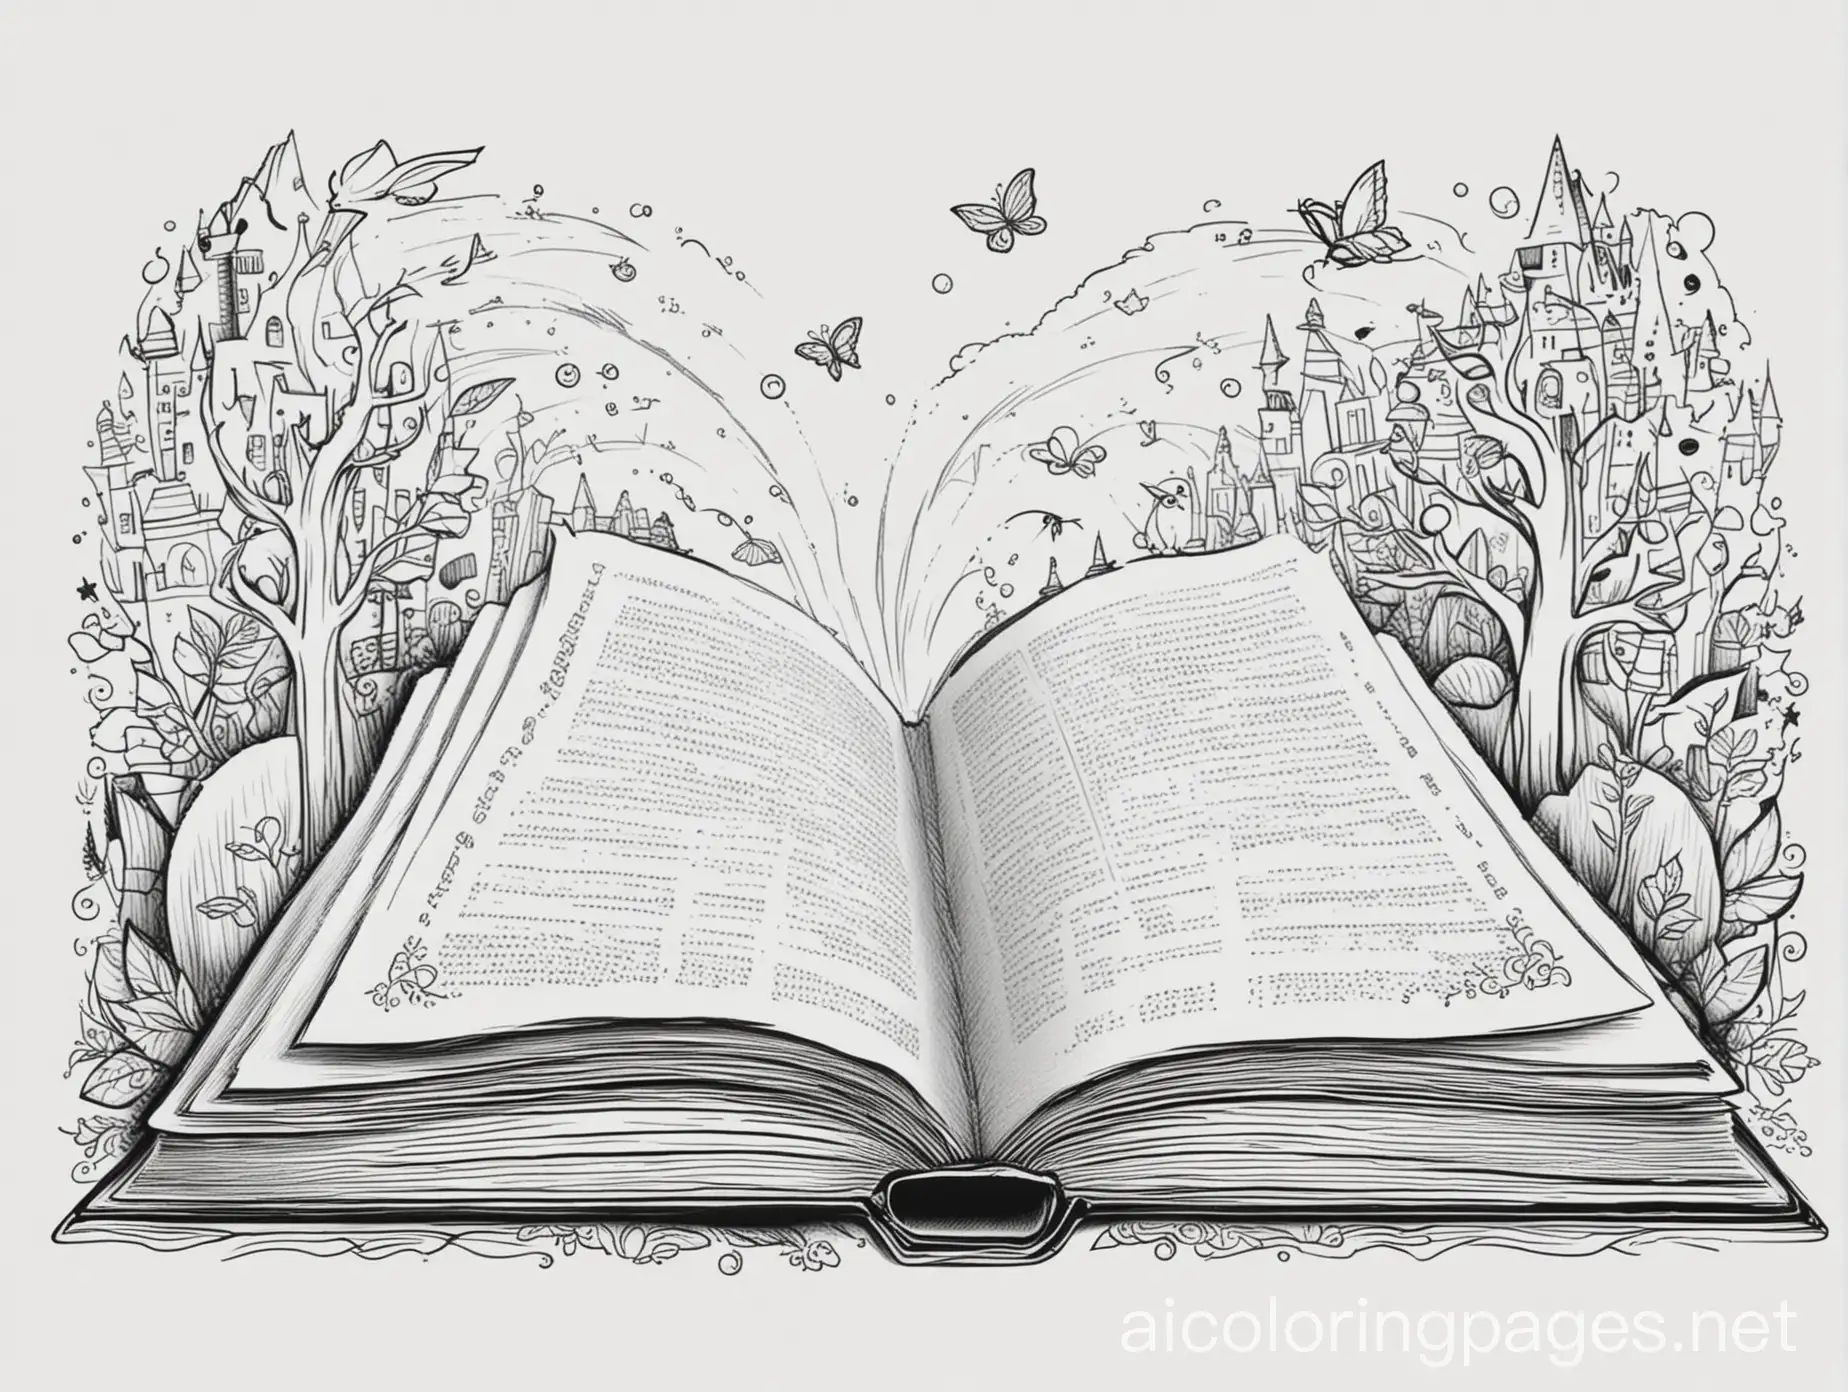 Magical books, Coloring Page, black and white, line art, white background, Simplicity, Ample White Space. The background of the coloring page is plain white to make it easy for young children to color within the lines. The outlines of all the subjects are easy to distinguish, making it simple for kids to color without too much difficulty